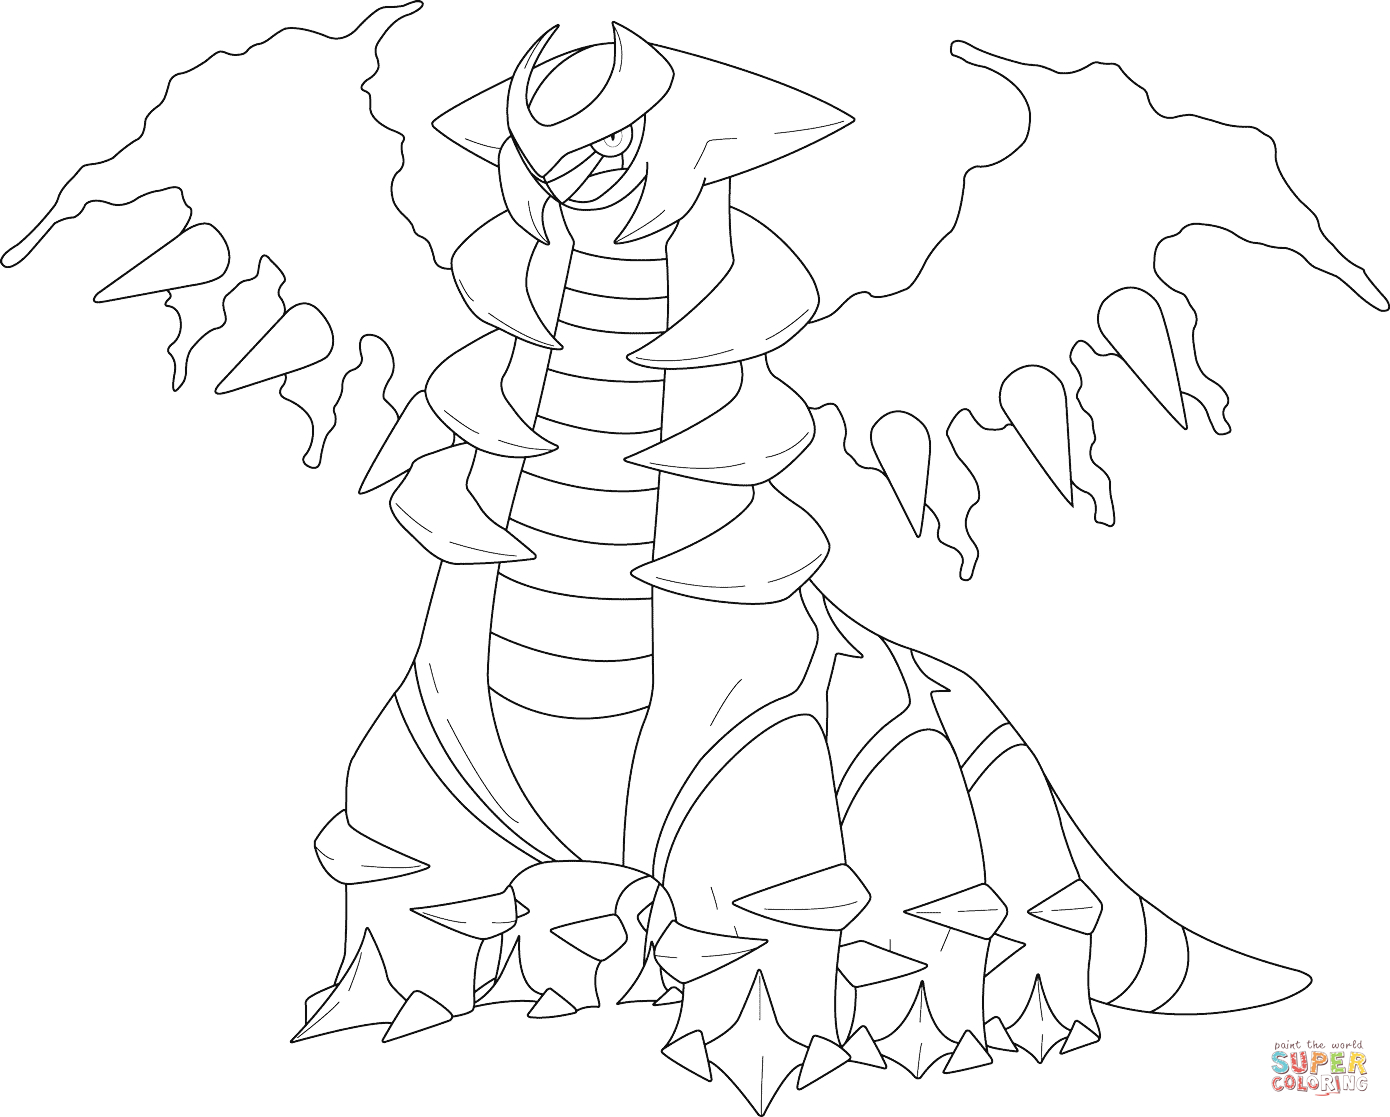 Giratina Coloring Pages Giratina In Altered Form Coloring Page Free Printable Coloring Pages